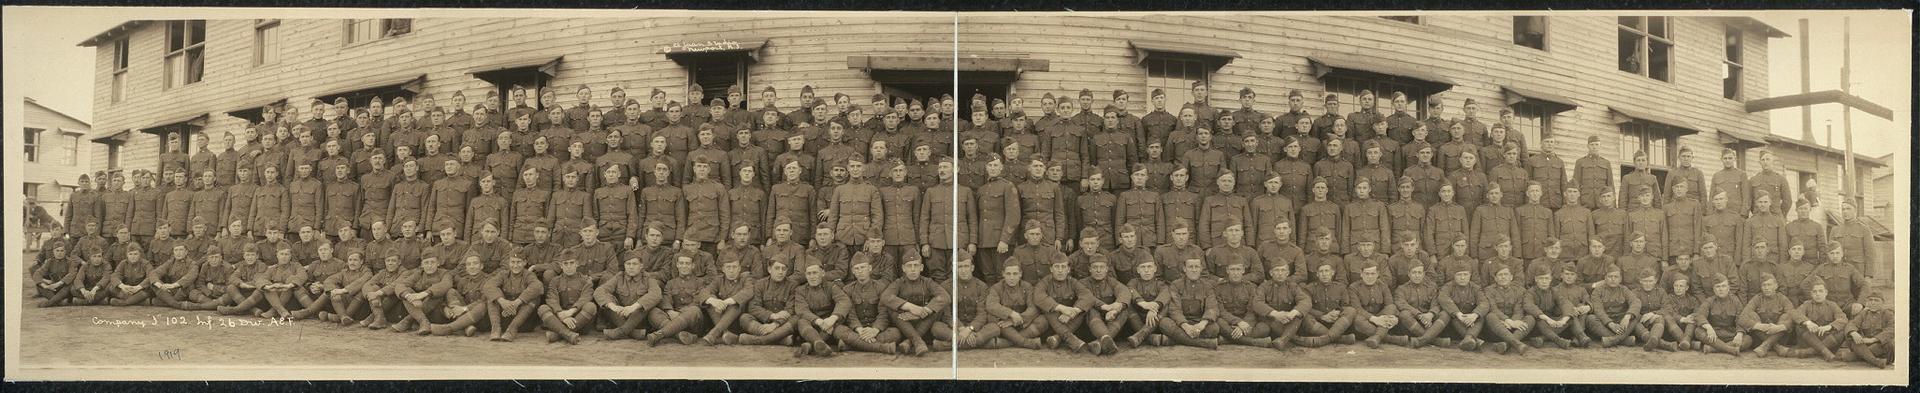 Members of the US Army Company "I", 102nd Infantry Regiment circa 1919.